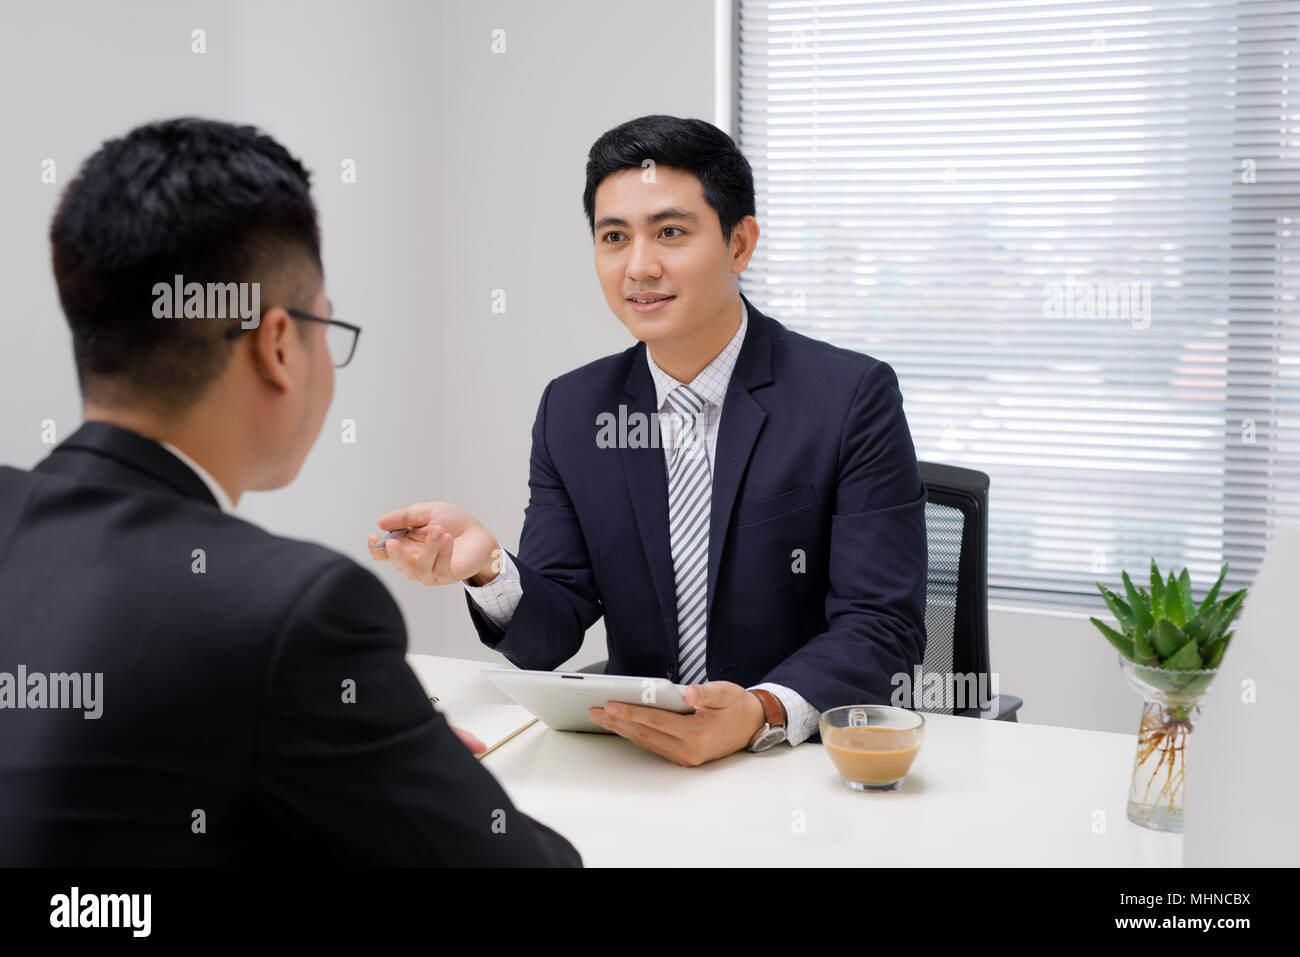 Salesman explaining his idea of overcoming crisis to co-worker Stock Photo